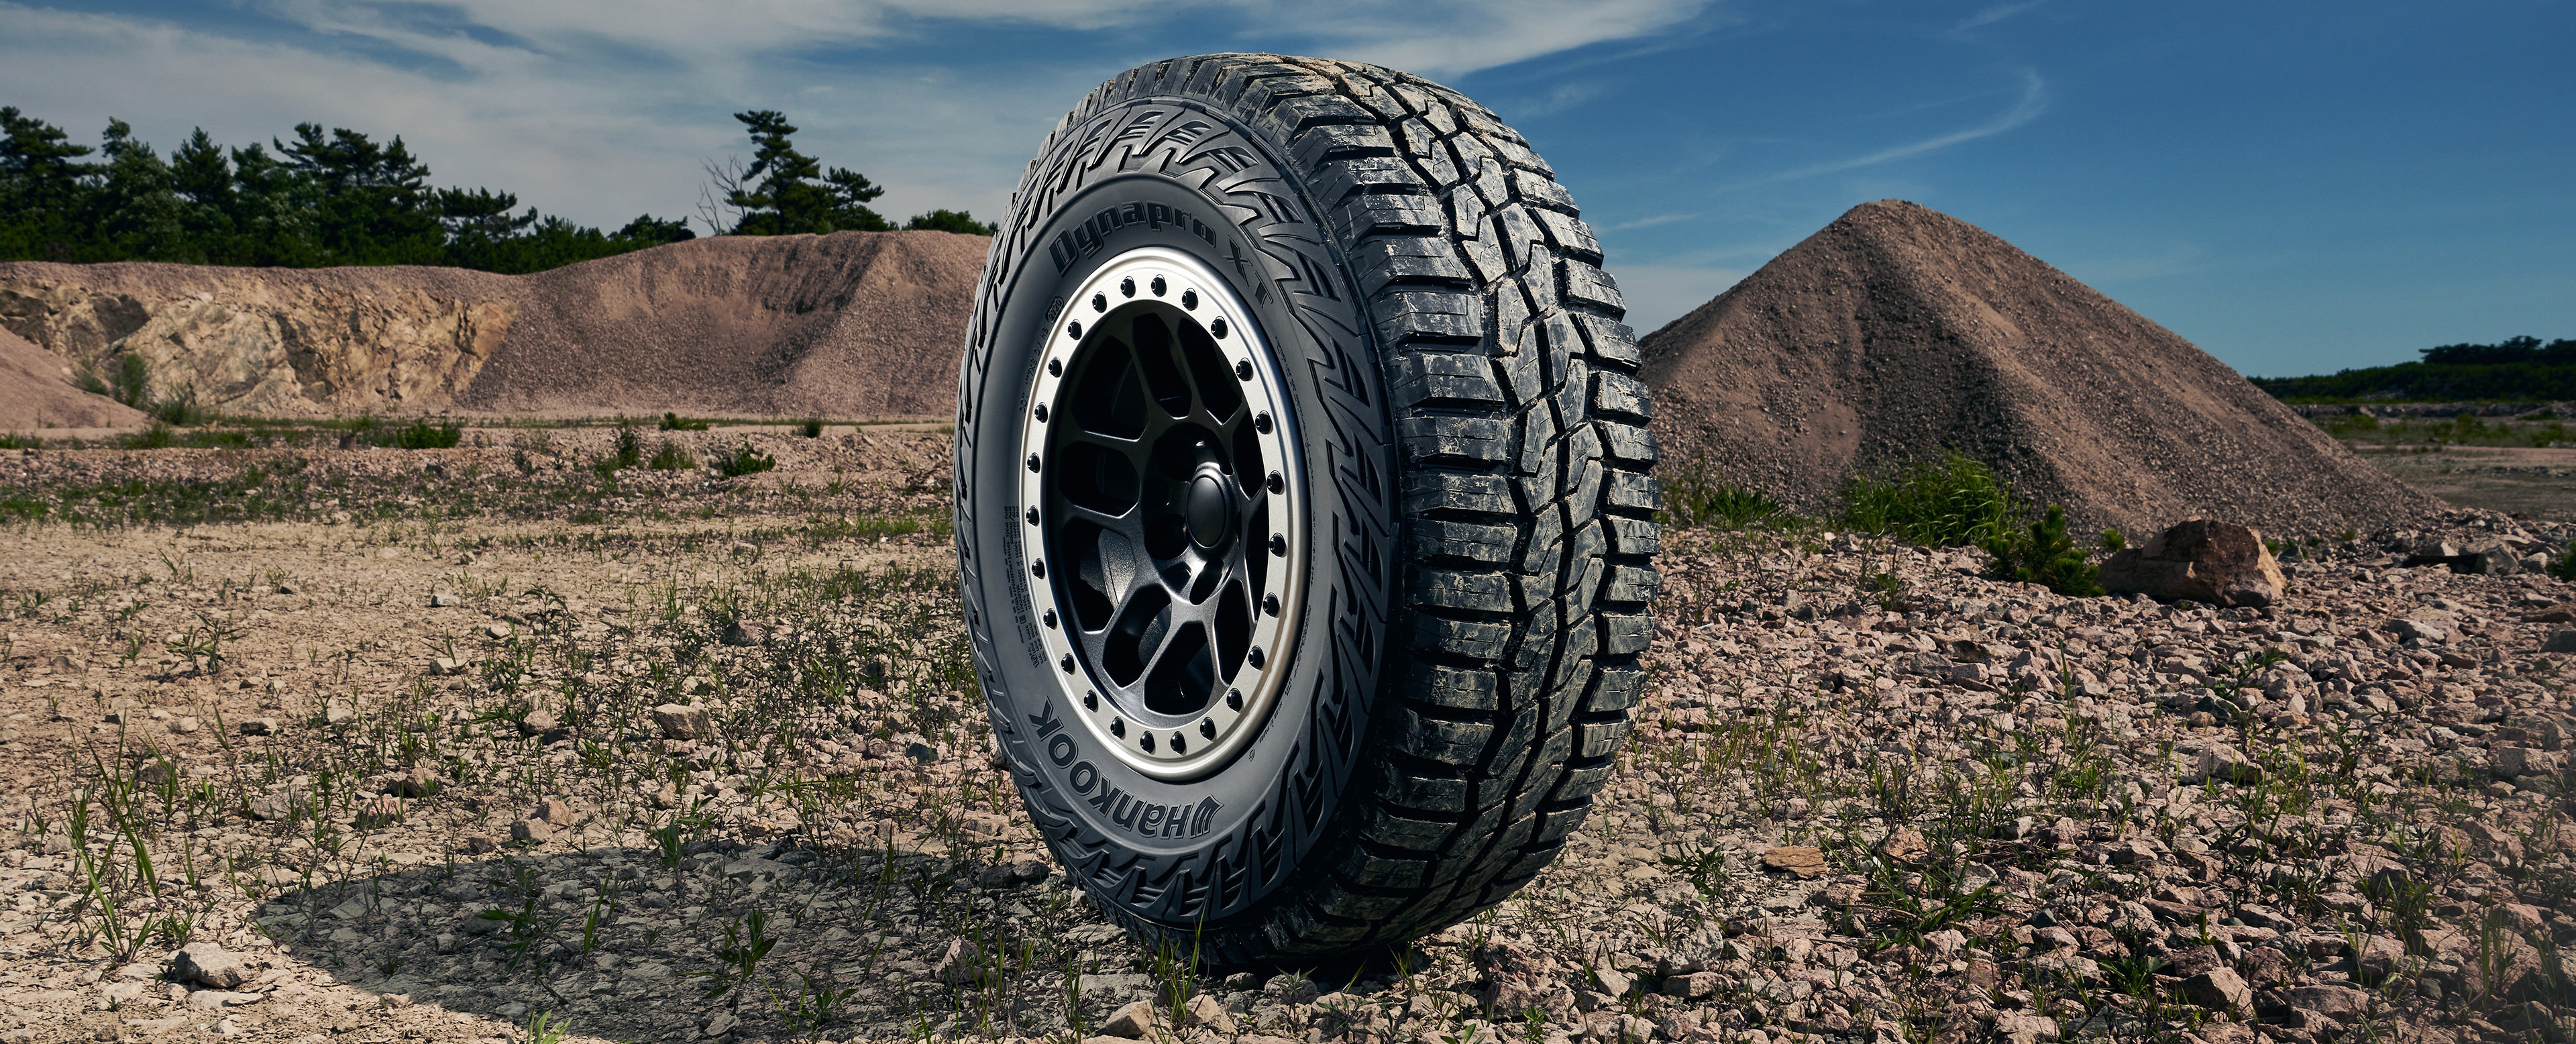 Hankook Tire & Technology-Tires-Dunapro-Dynapro XT-RC10-Ruggedness meets comfort